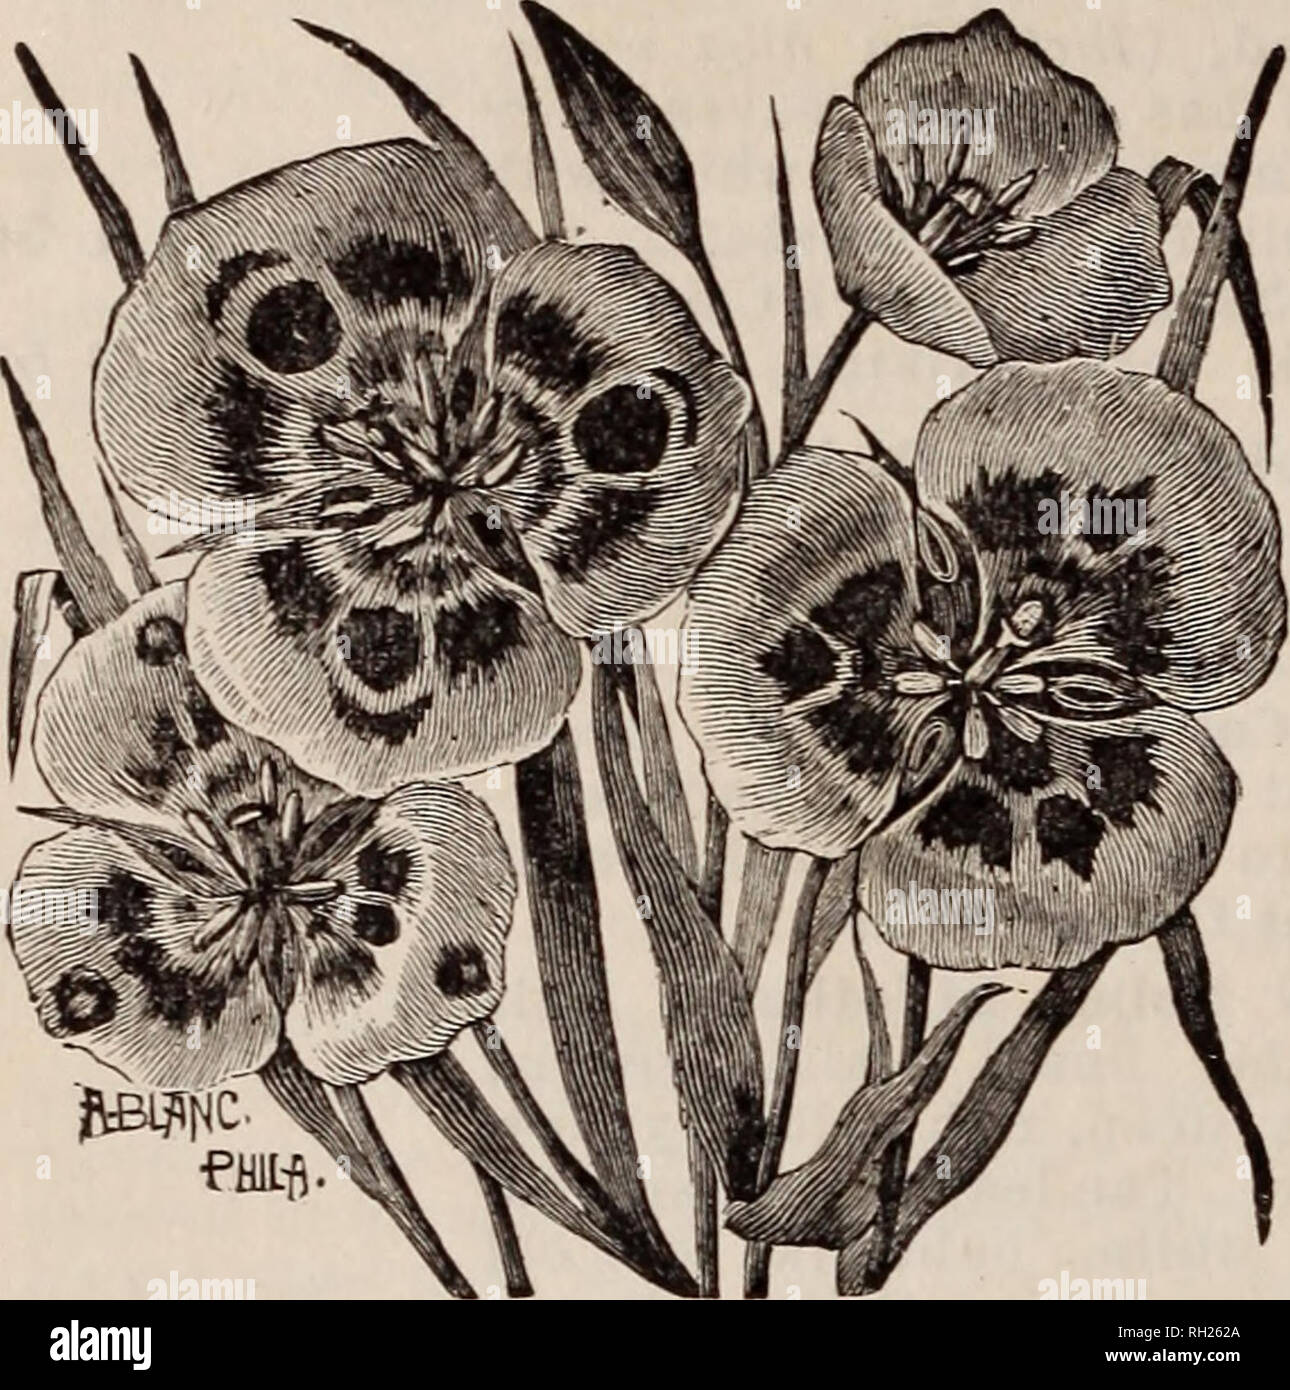 . Bulbs. Horticulture Catalogs; Bulbs (Plants) Seeds Catalogs. 10 THE GERMAIN SEED CO. CALOCHORTUS-Continued Each Venustus Oculatus, white, cream, lilac or purple, habit similar to the above variety -   5 Venustus Pictus, a creamy white, brilliantly marked, often with a gold blotch. 5 Venustus Purpurascens, purplish lilac outside and top of petals, creamy white half way, purple in center, beautiful eye at center of each petal. Flowers full 3 inches across 5 Venustus Roseus. a creamy white or lilac with an eye midway and a rose col- ored blotch at apex 5 Vesta, white, suffused with lilac or ros Stock Photo